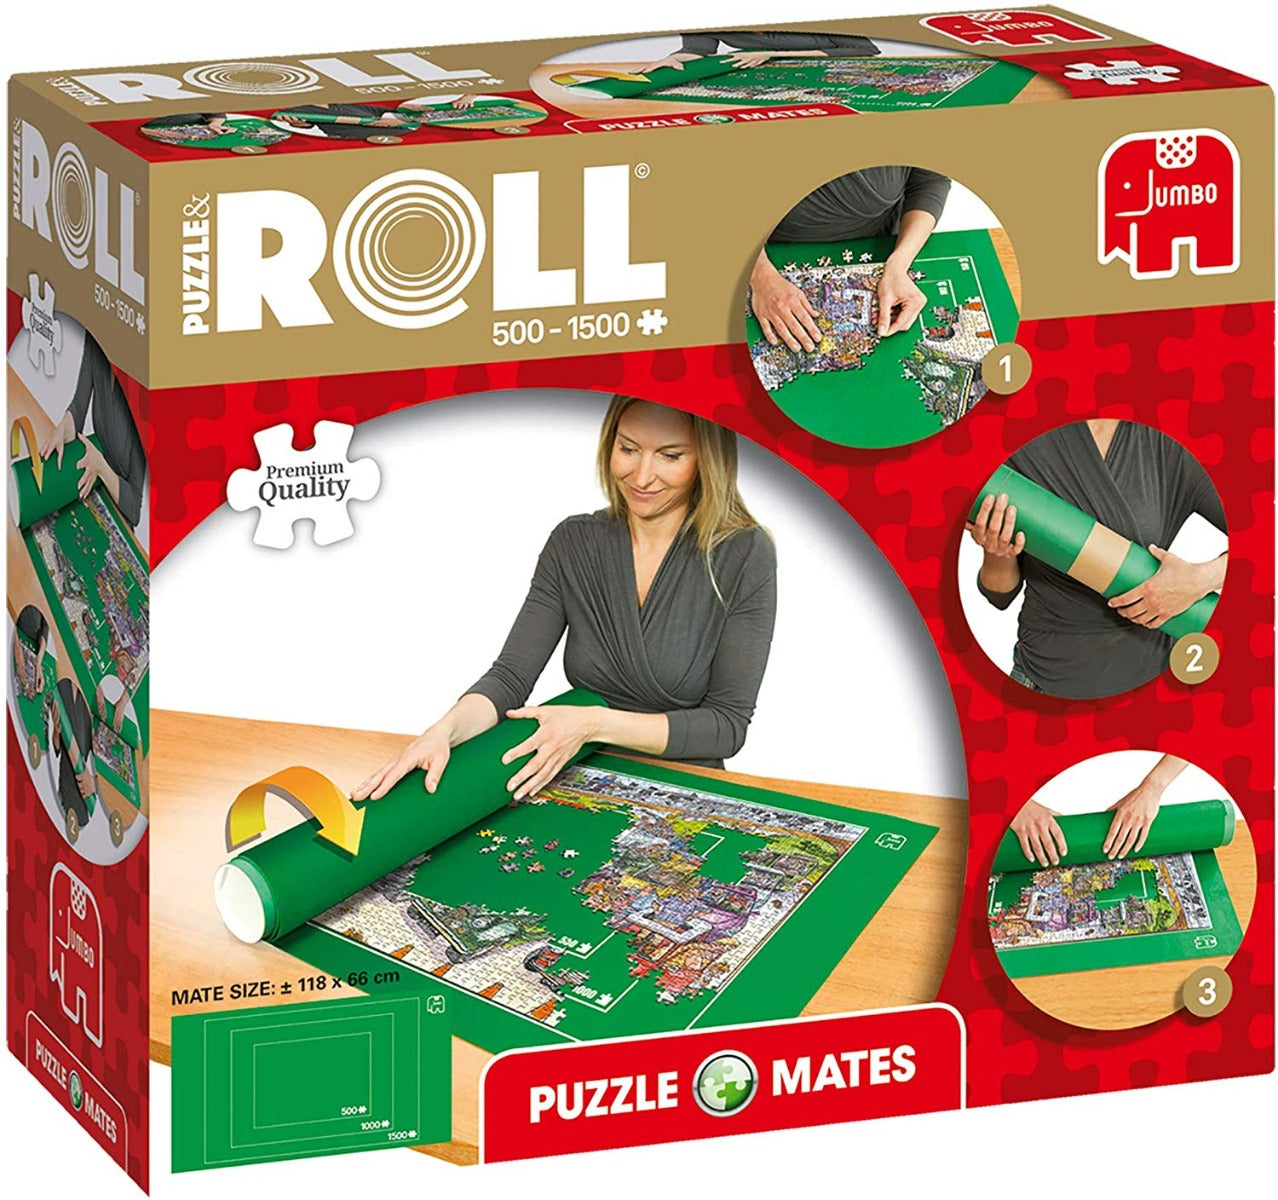 Jumbo Puzzle Mates Puzzle & Roll Jigroll For Puzzles Up To 1500 Pieces